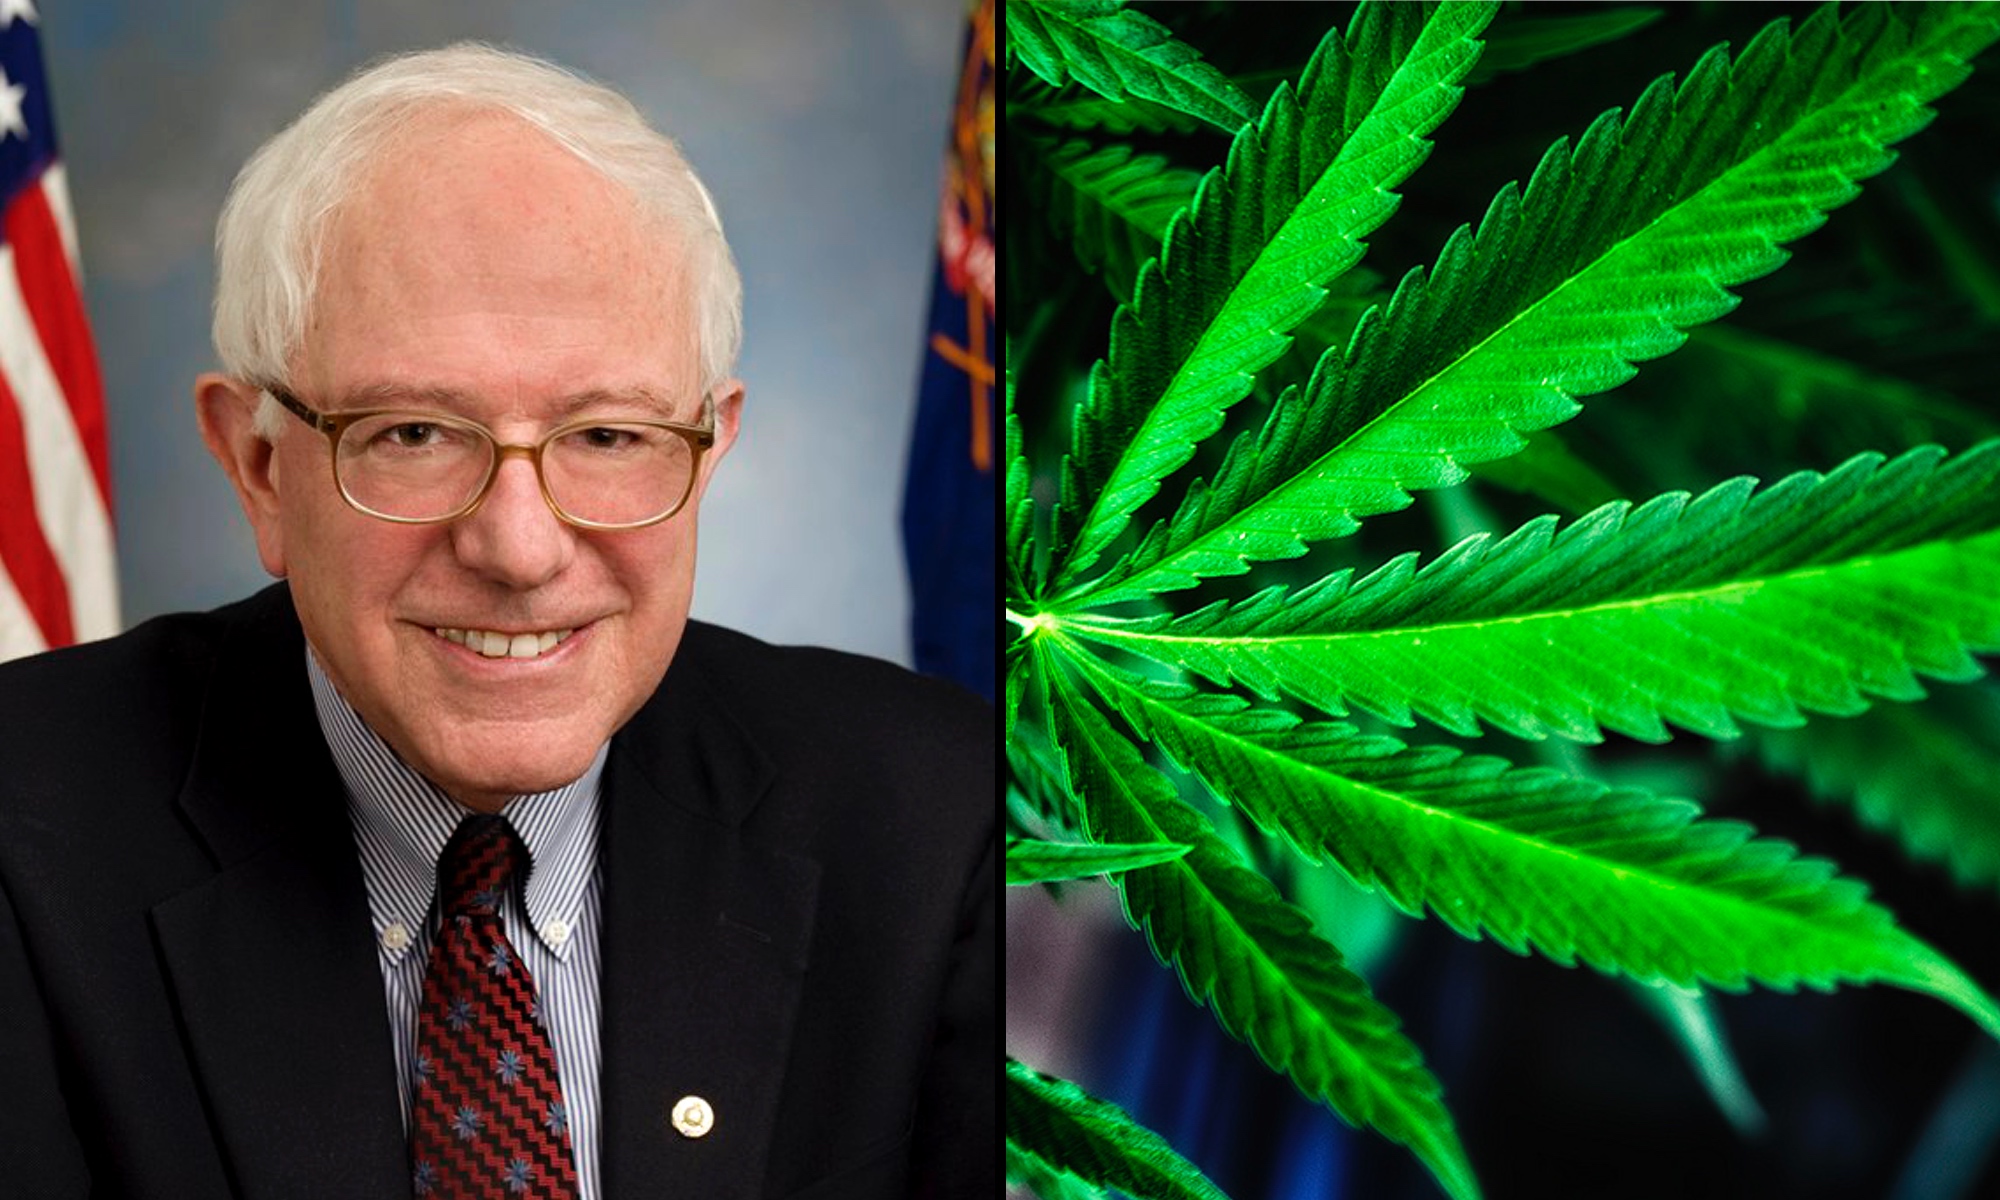 Bernie Sanders ‘Worries’ About Teen Enthusiasm For Marijuana Legalization When Asked About Reform At High School Event